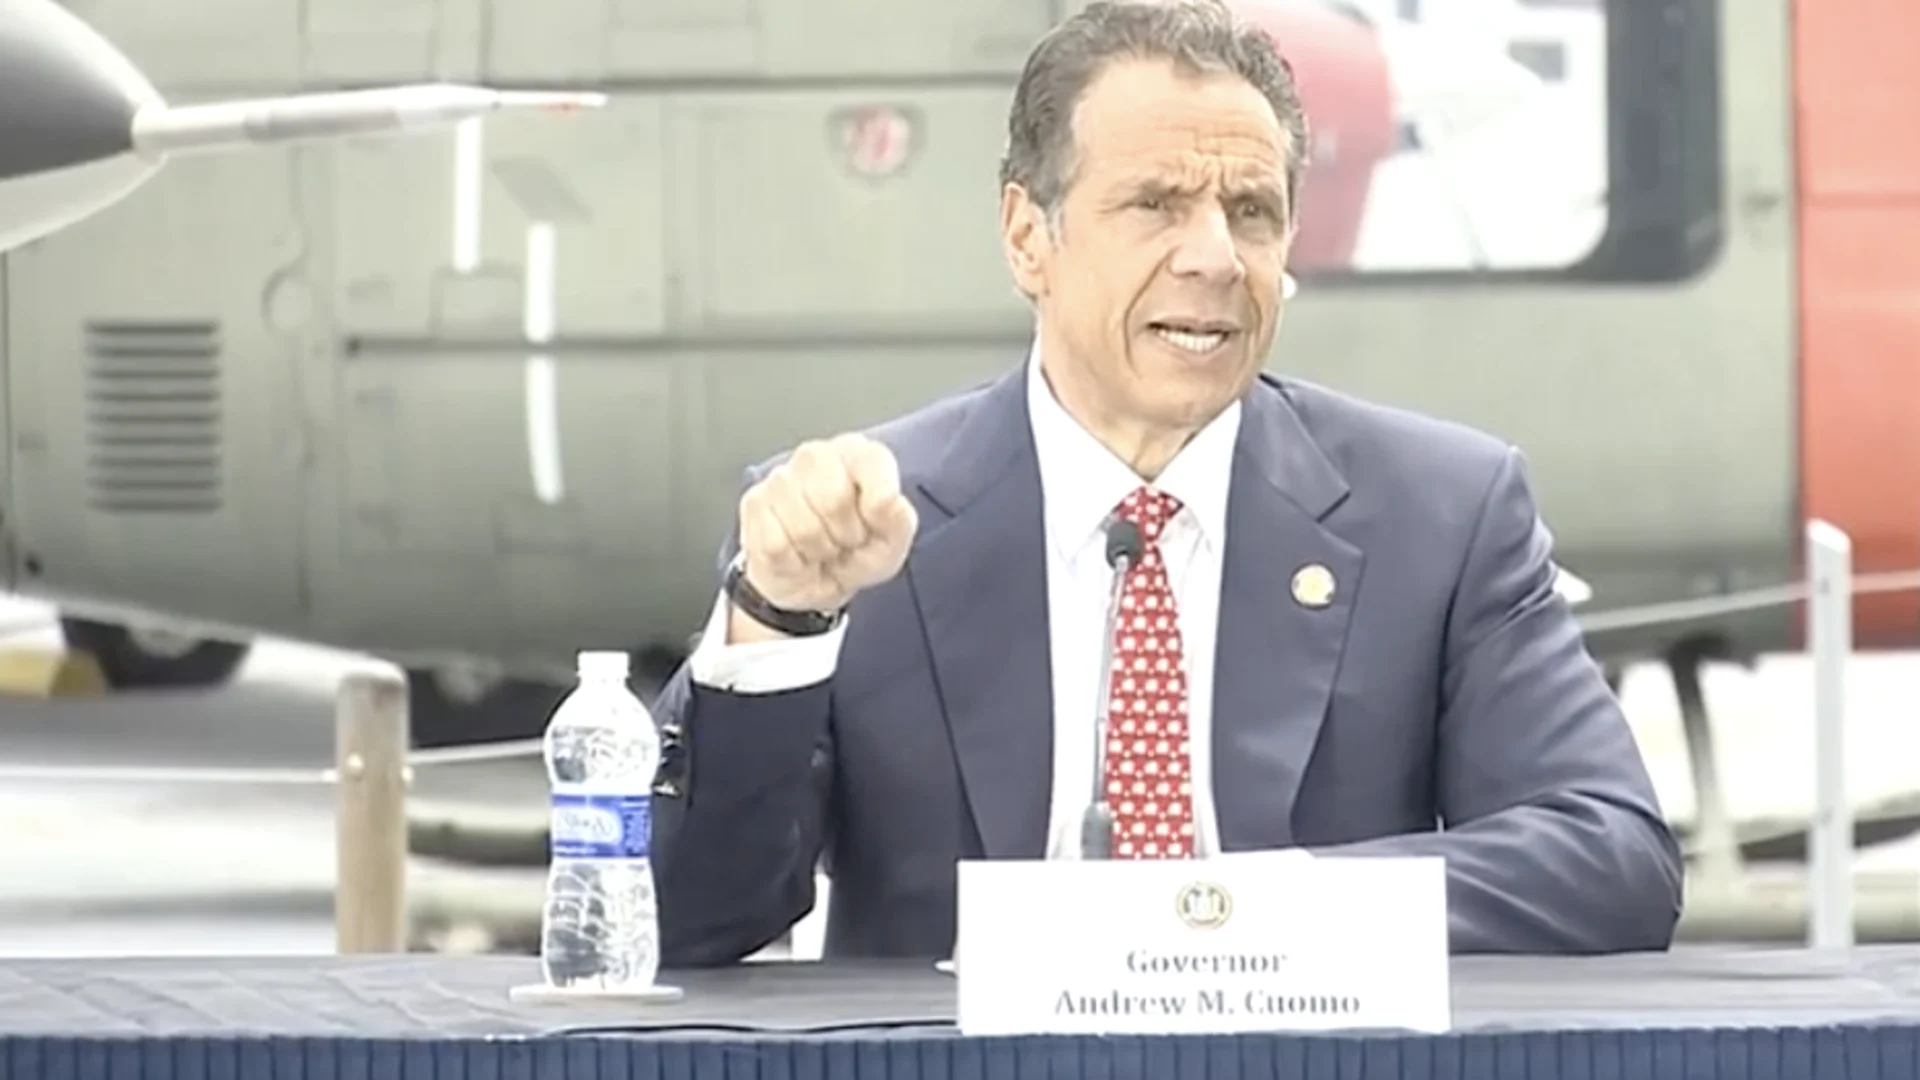 Gov. Cuomo calls on federal government to provide hazard pay for front-line workers